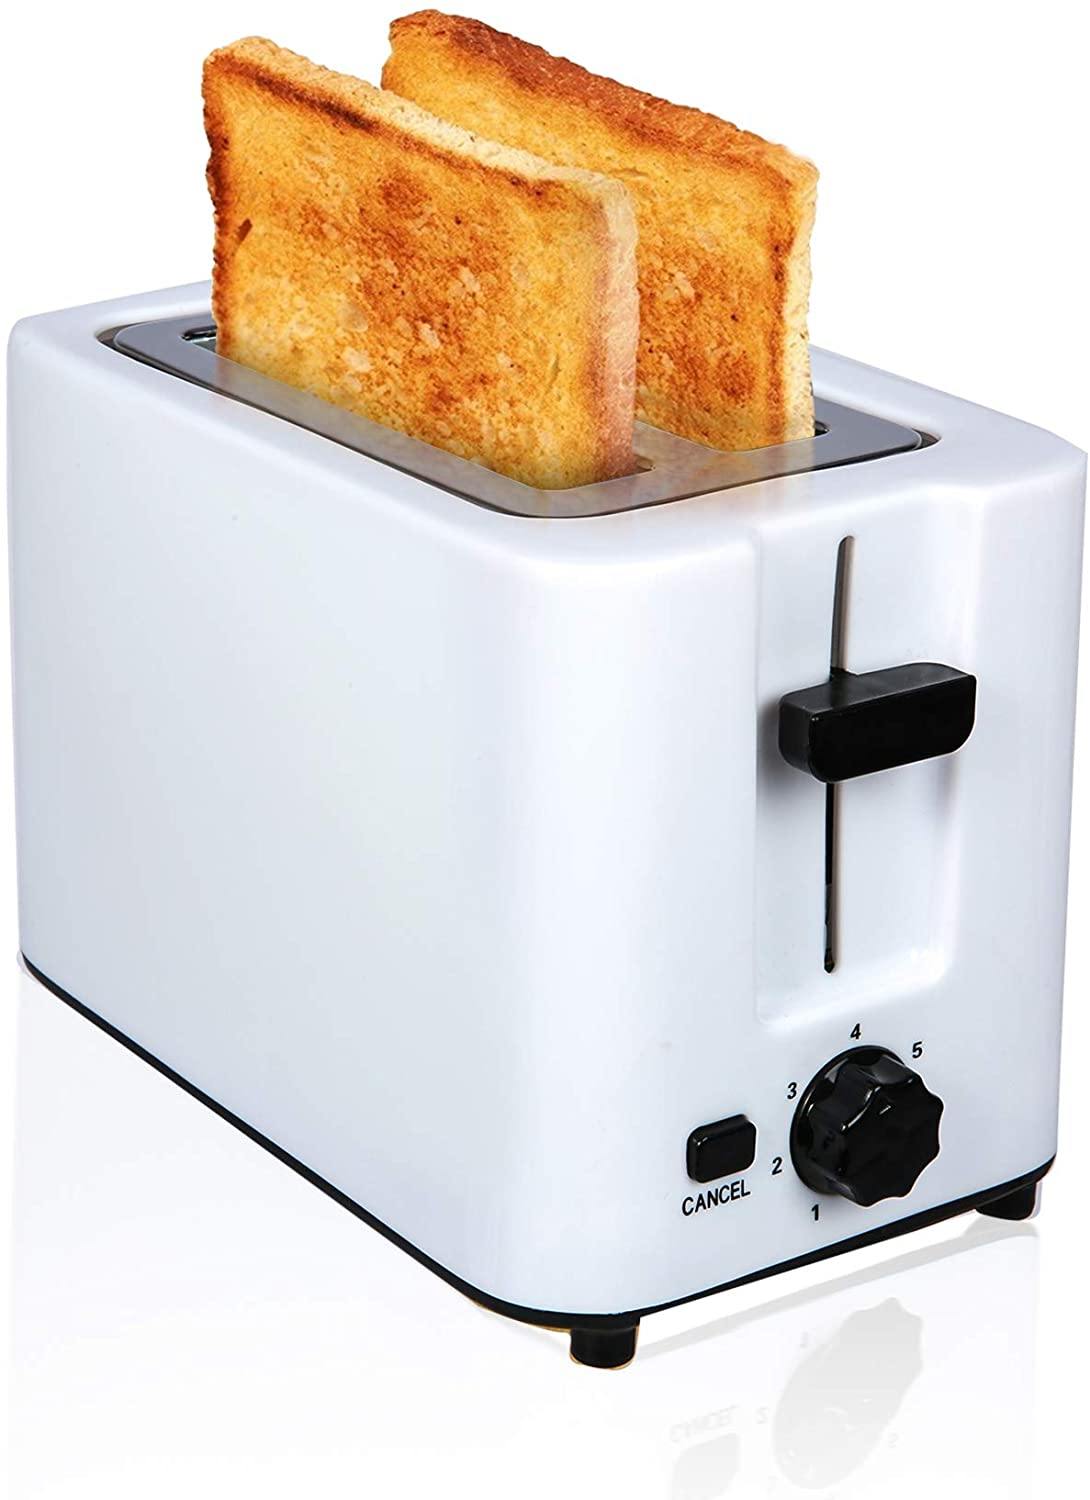 2 Slice Toaster with 2 Extra Wide Stainless Steel Slots, Toaster Oven with 7 Heating Sets - Bosonshop